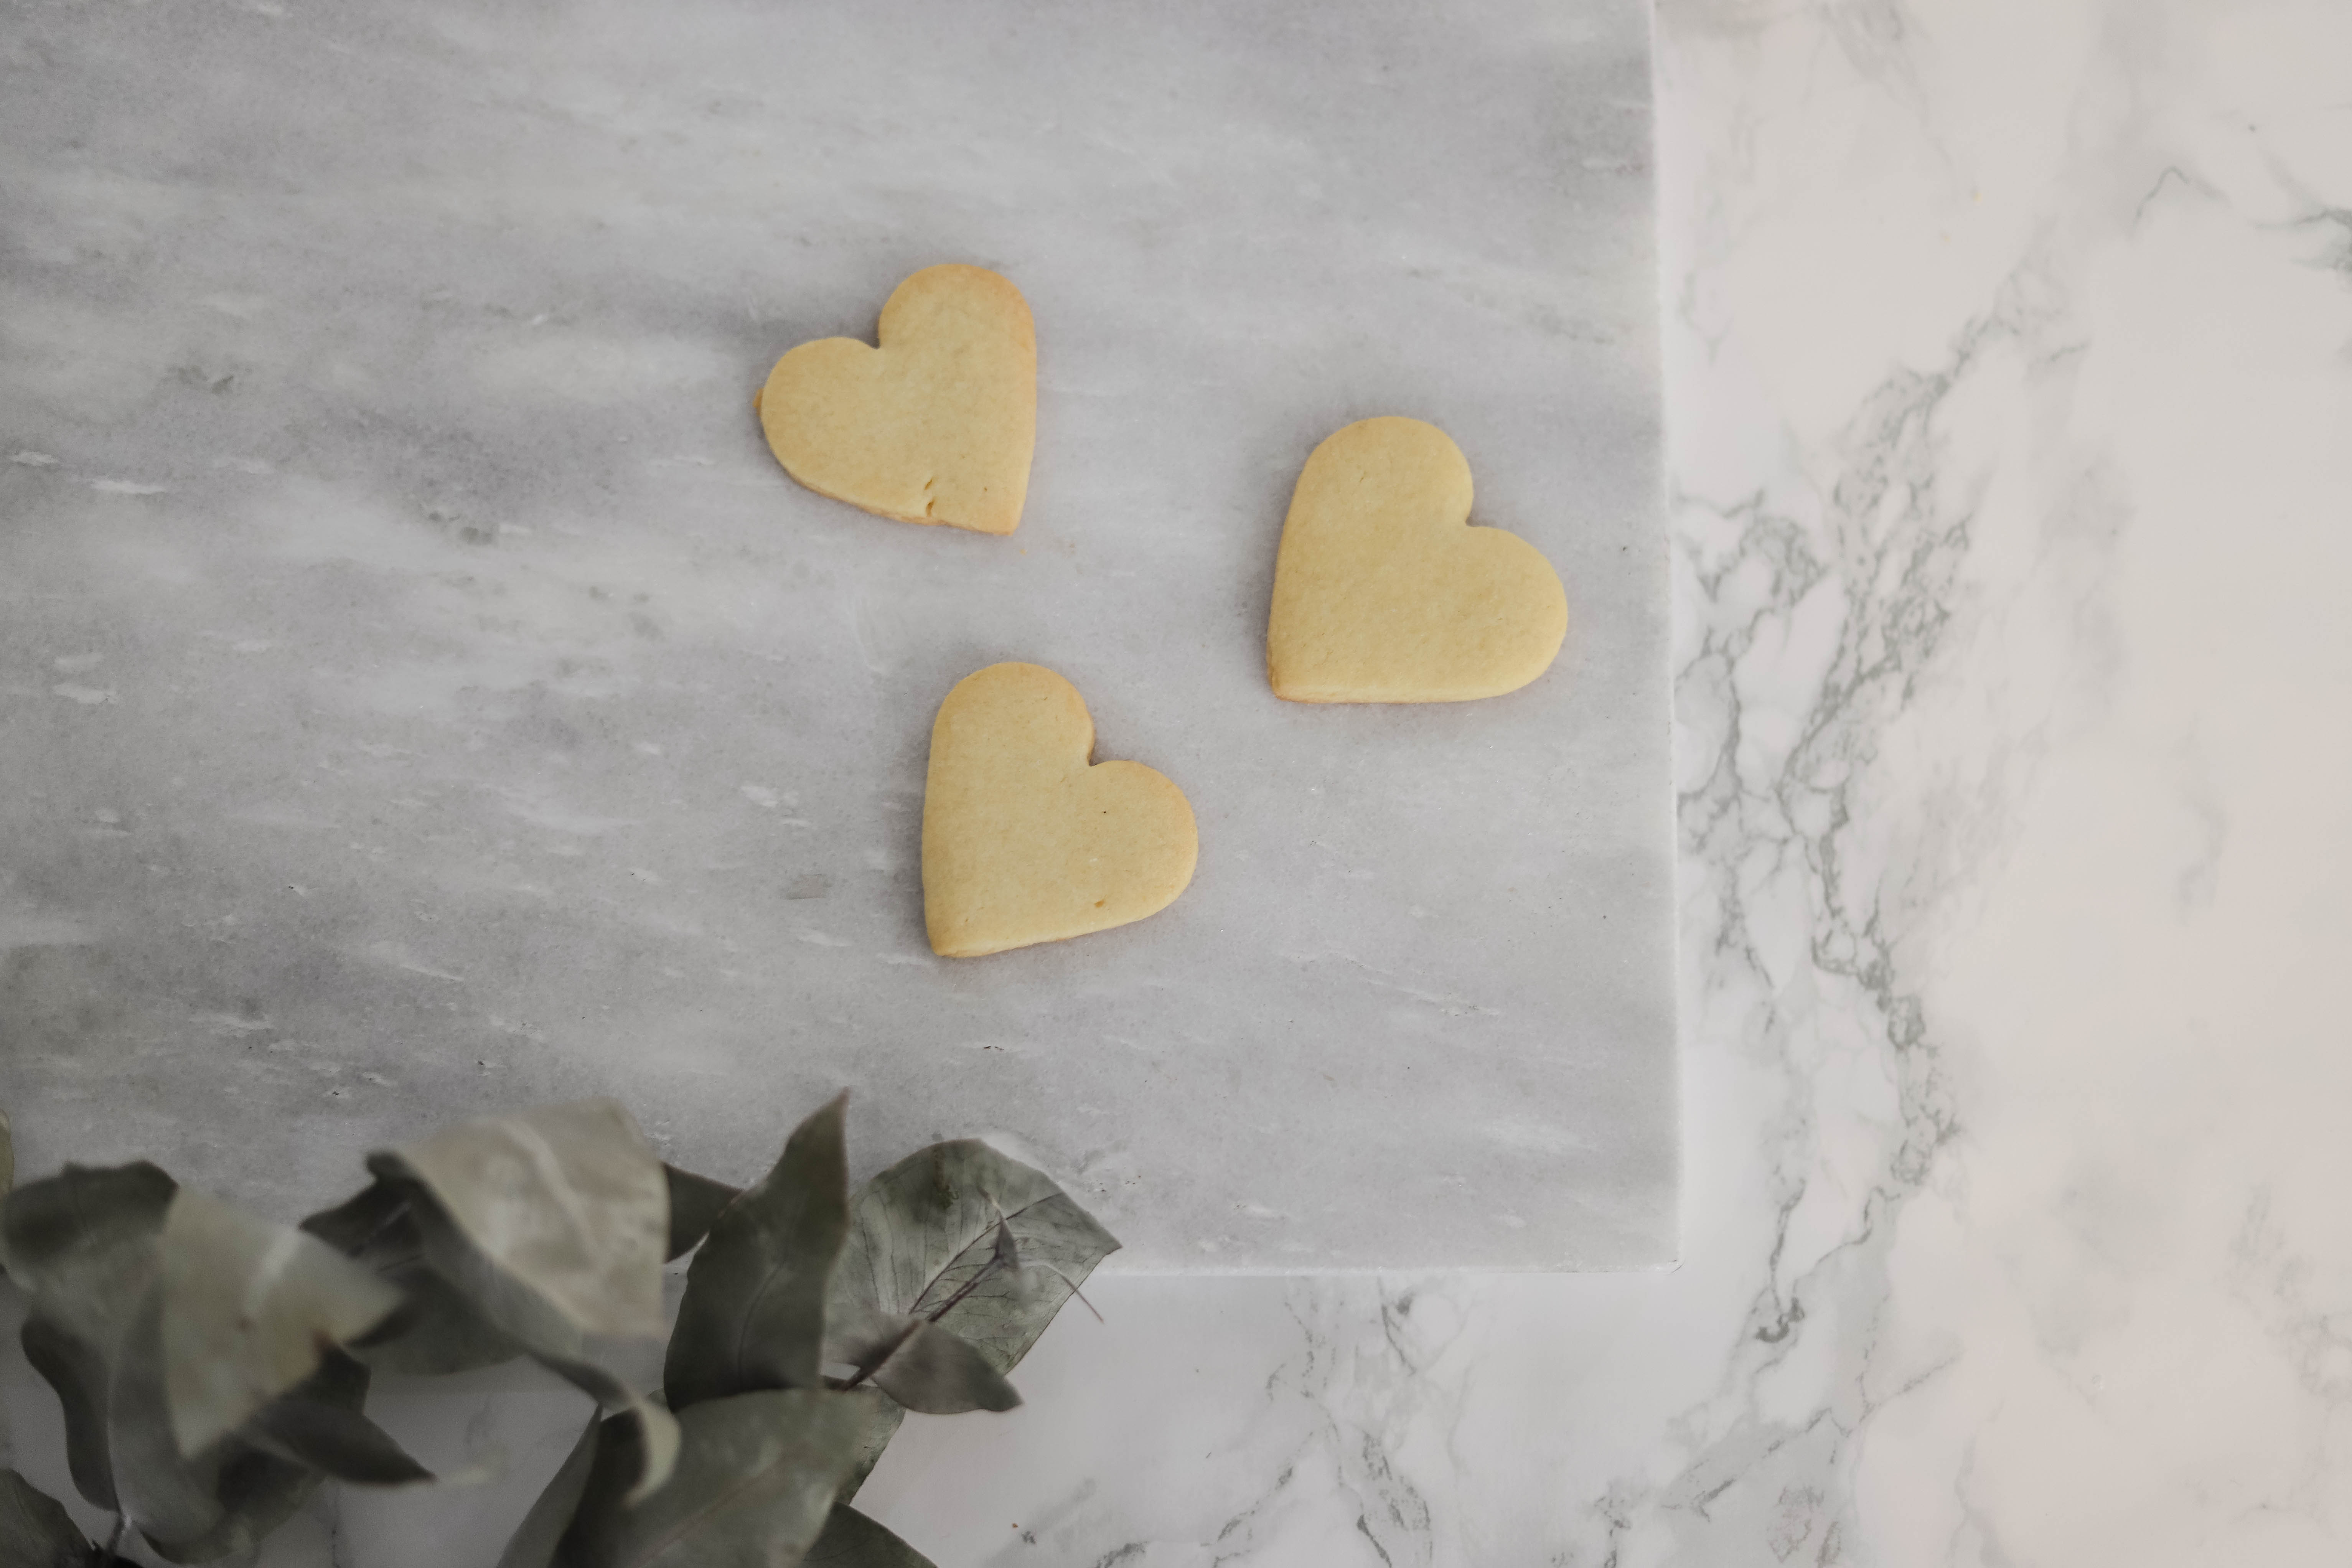 The Style Aesthetic | How To Make Sugar Cookies